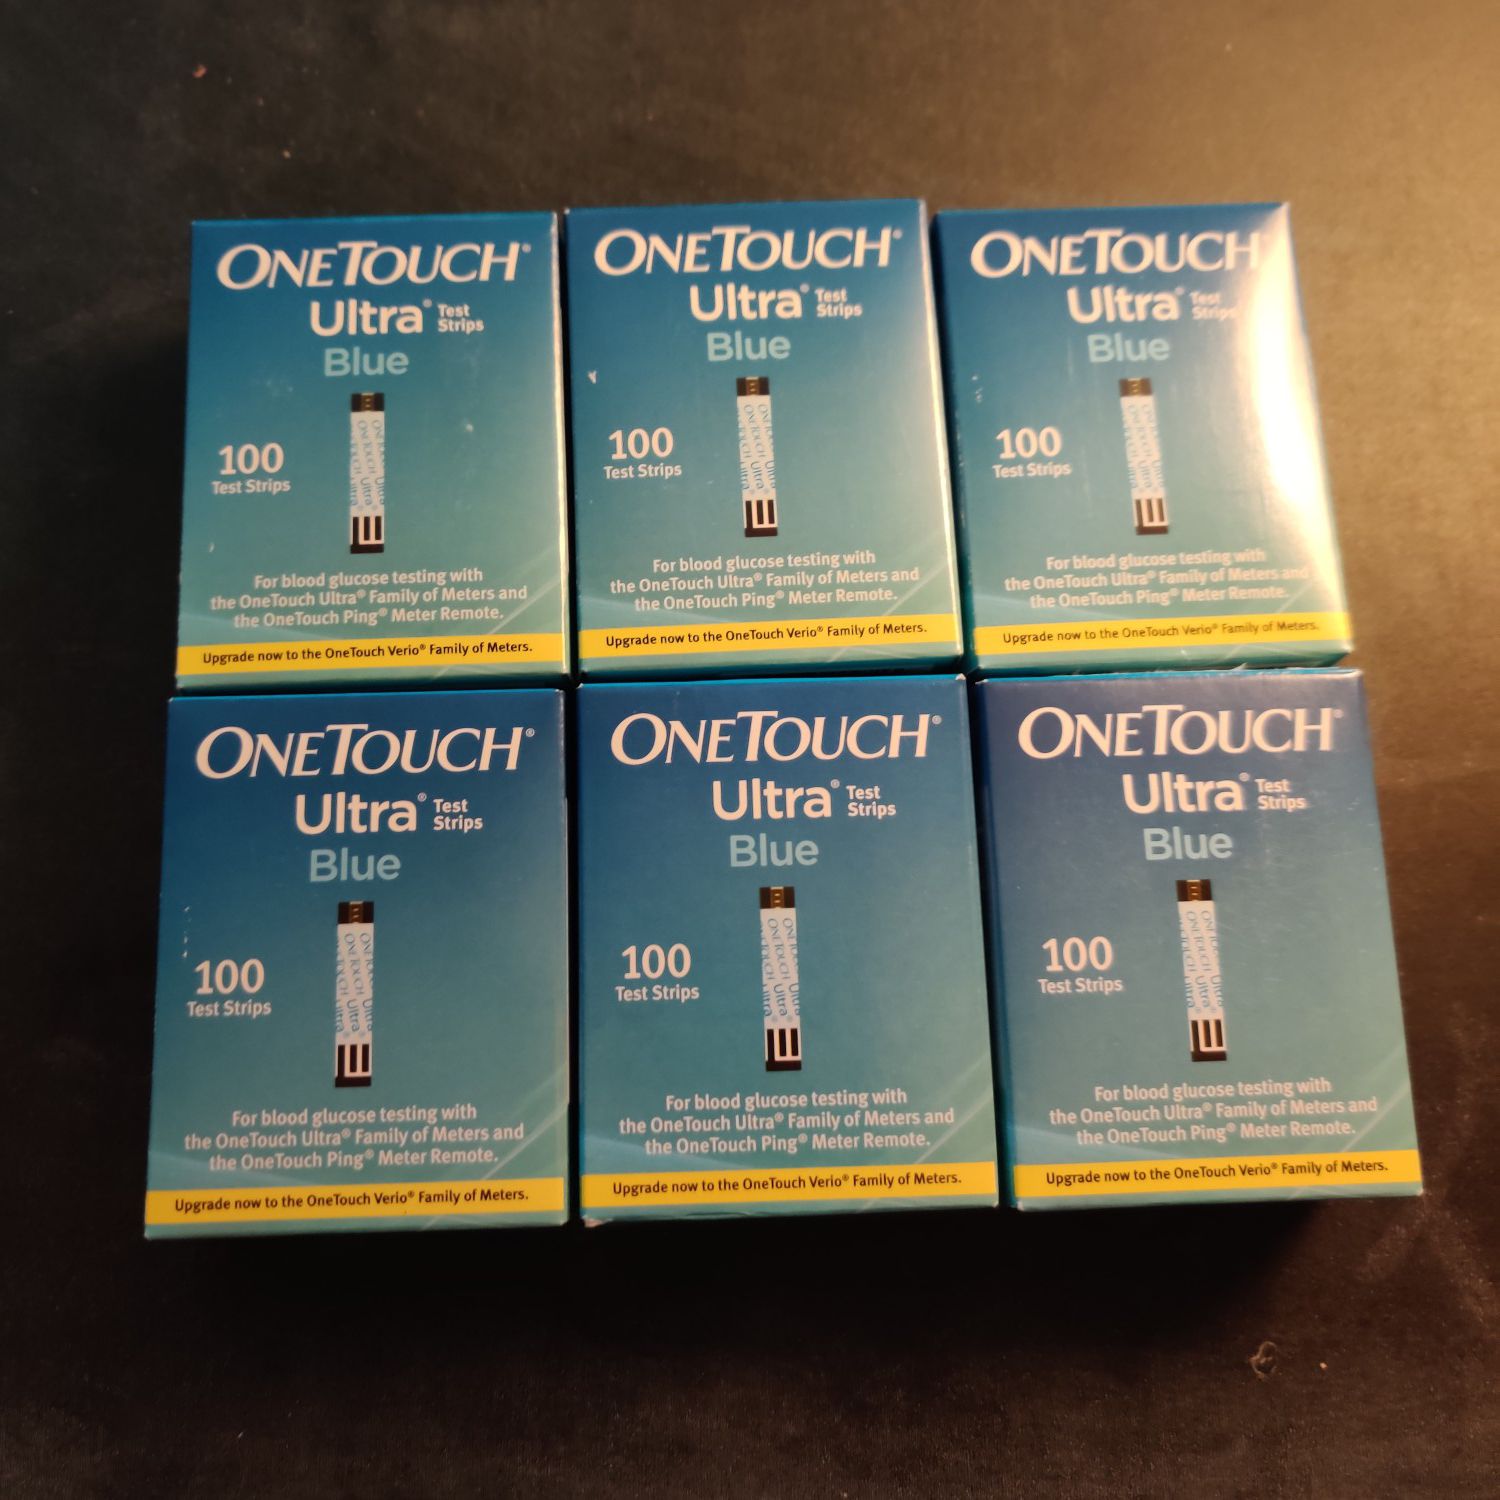 One Touch Ultra Blue Test strips